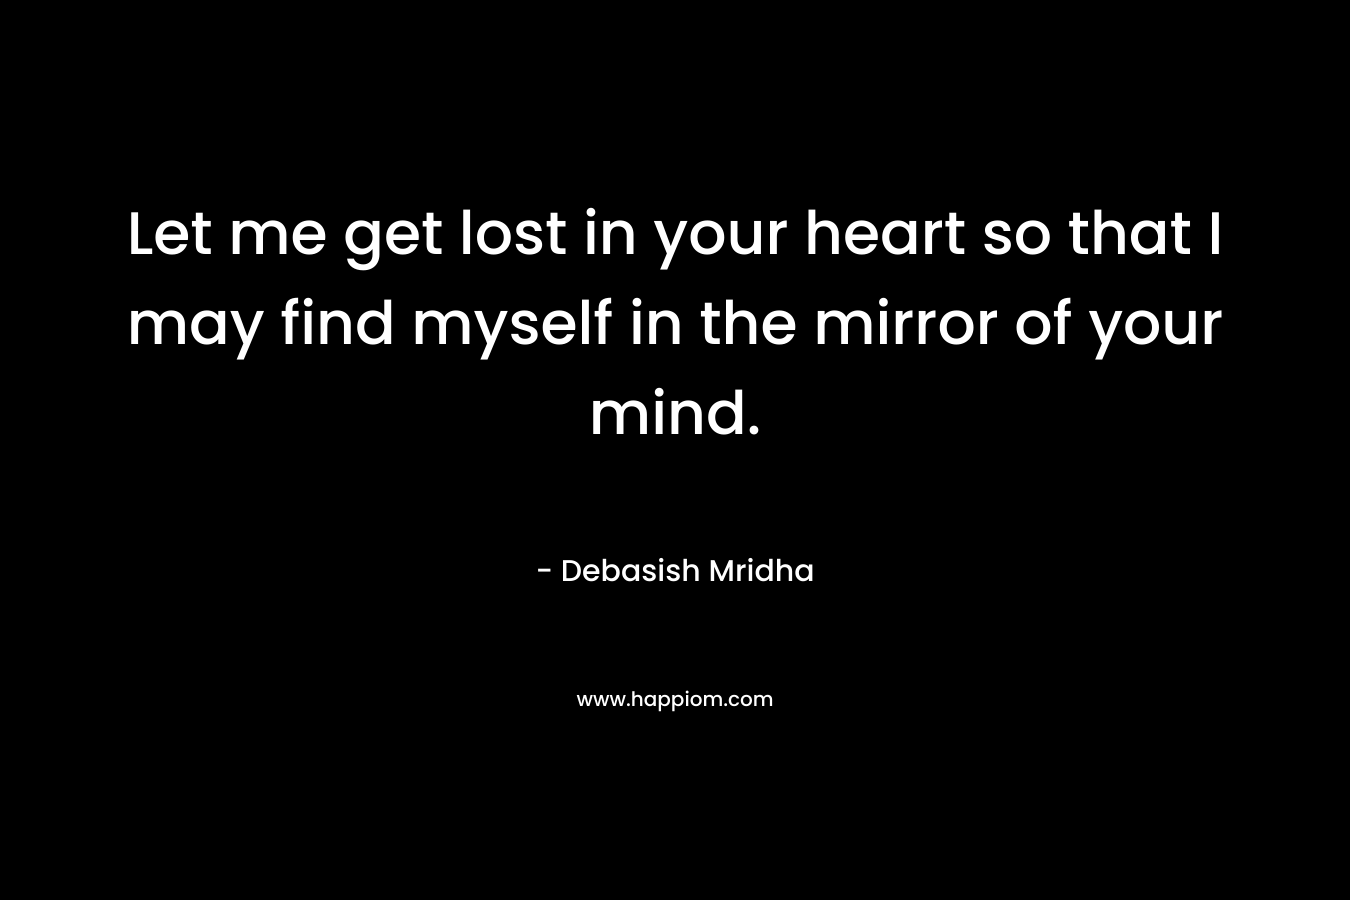 Let me get lost in your heart so that I may find myself in the mirror of your mind.